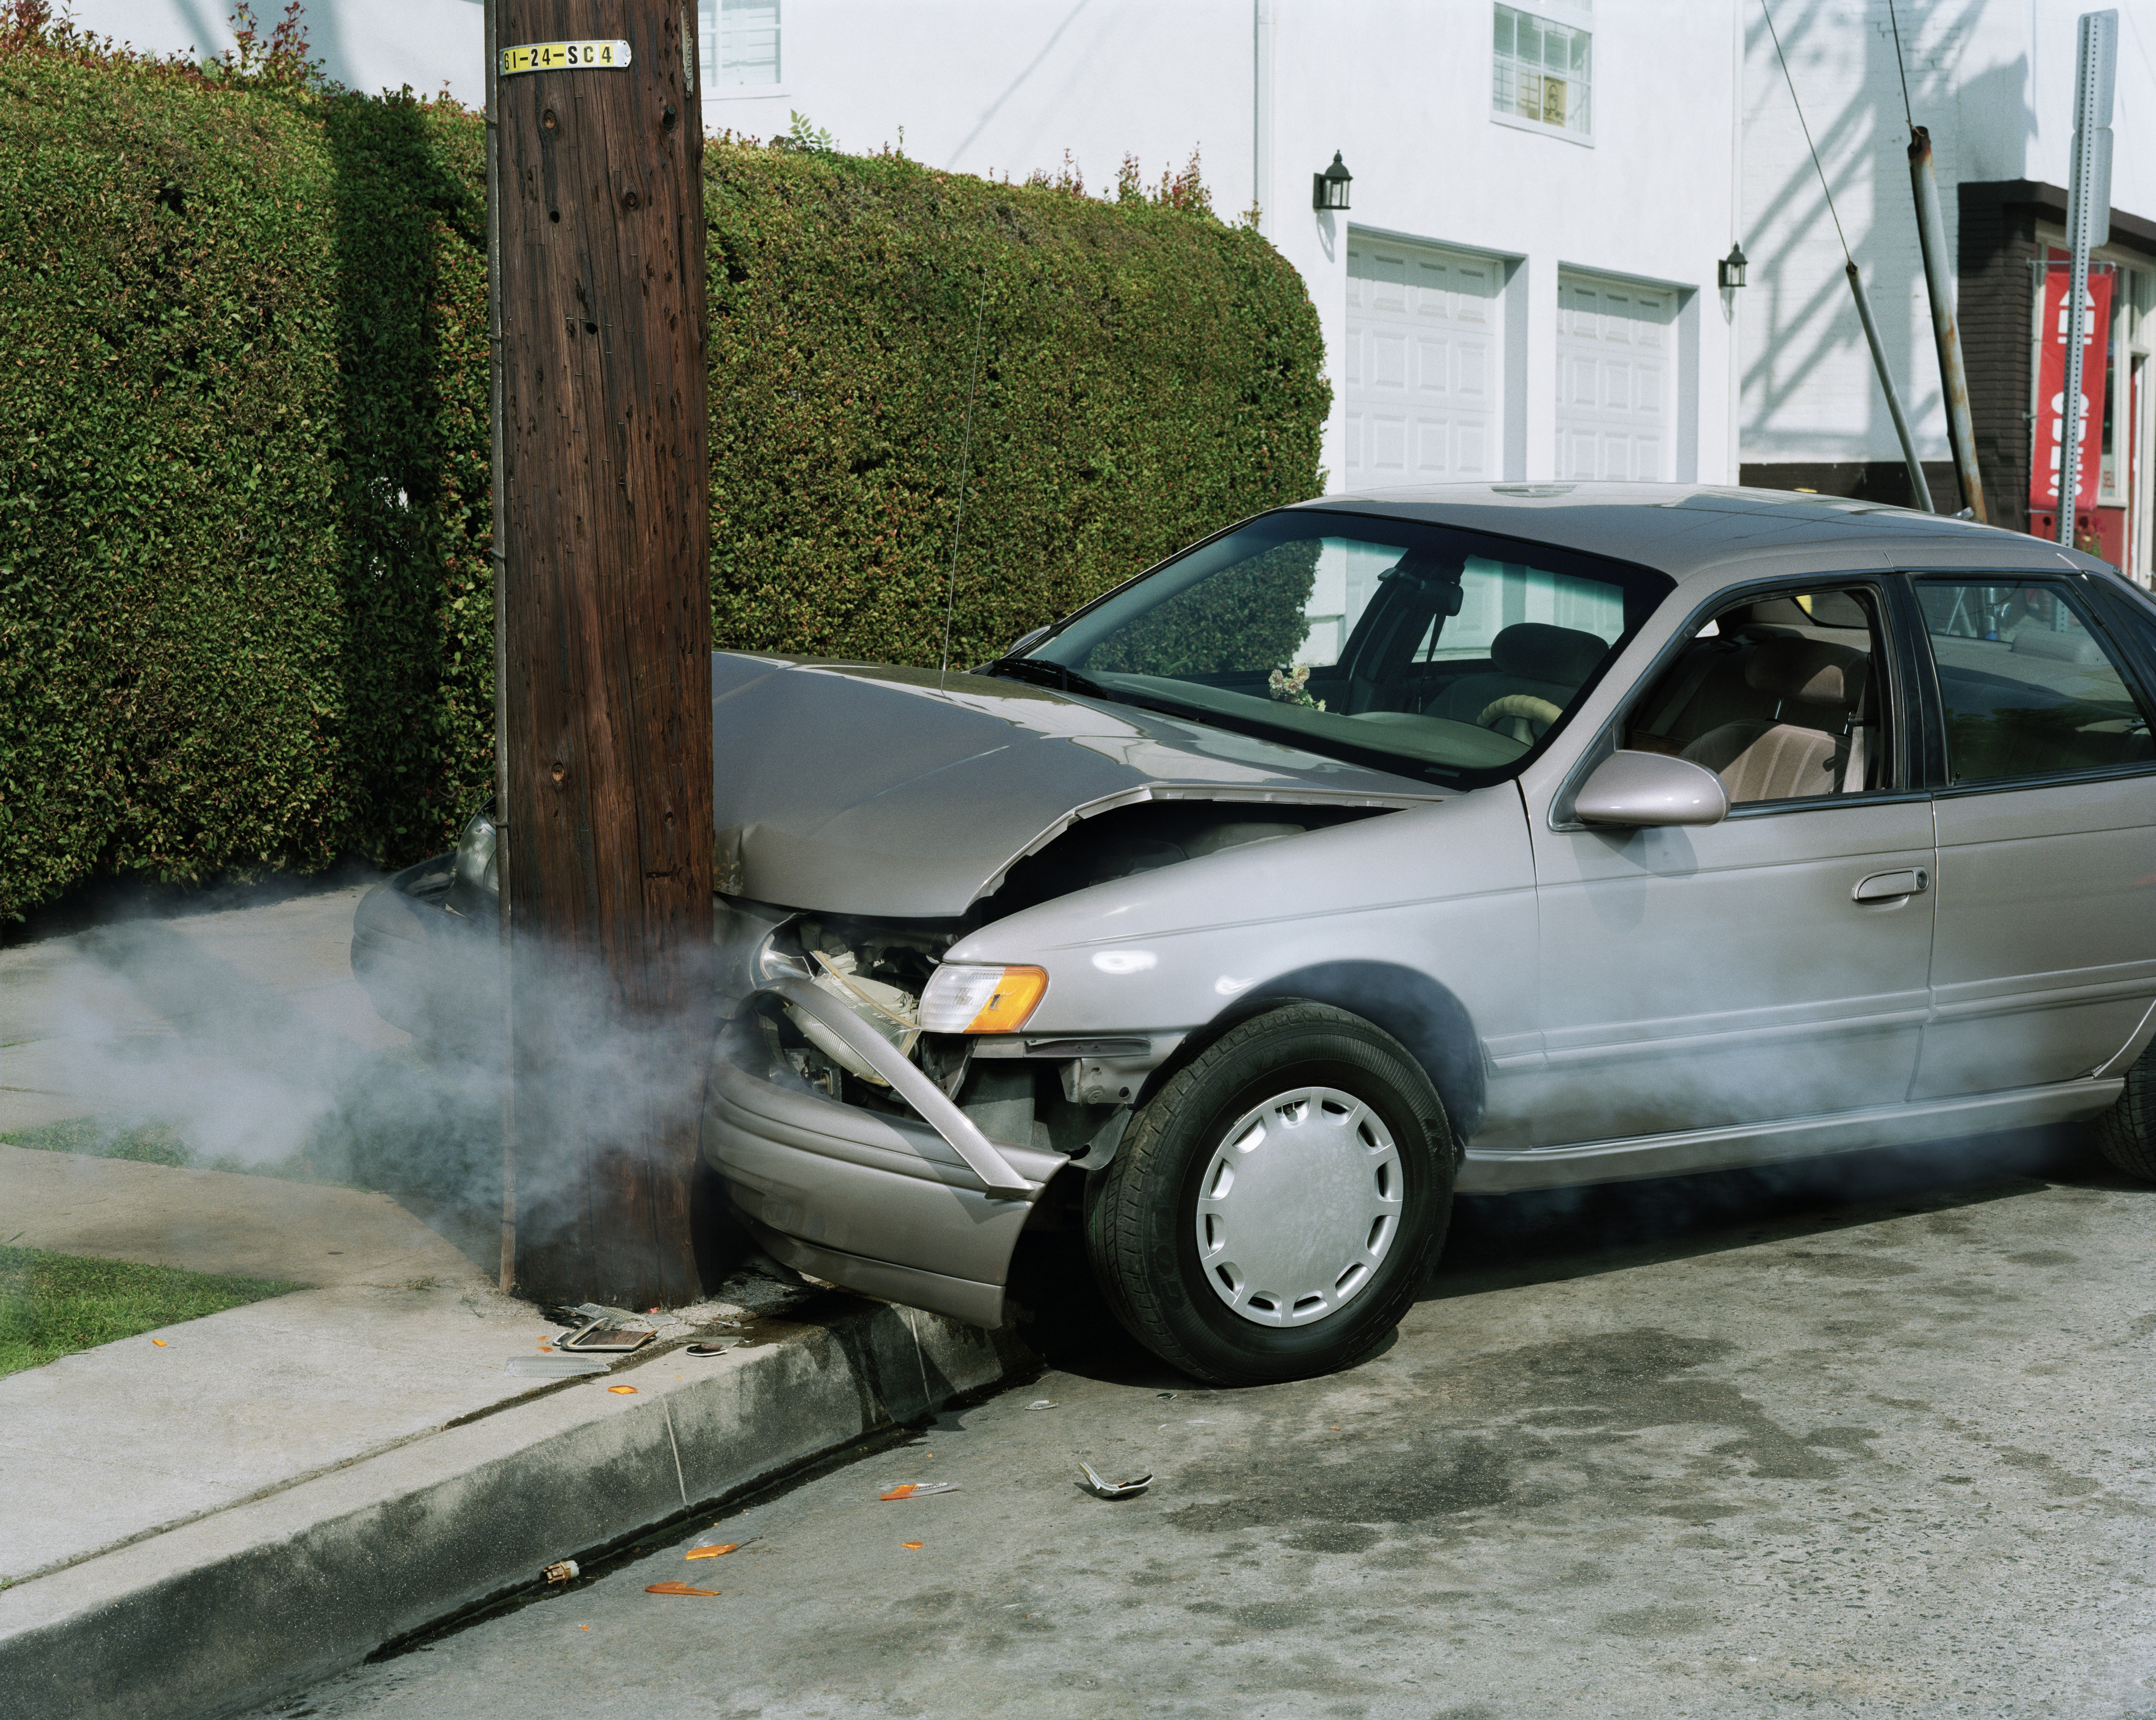 A silver car crashed into a wooden utility pole on the side of a residential street, its hood bent in and steam rolling from its engine.